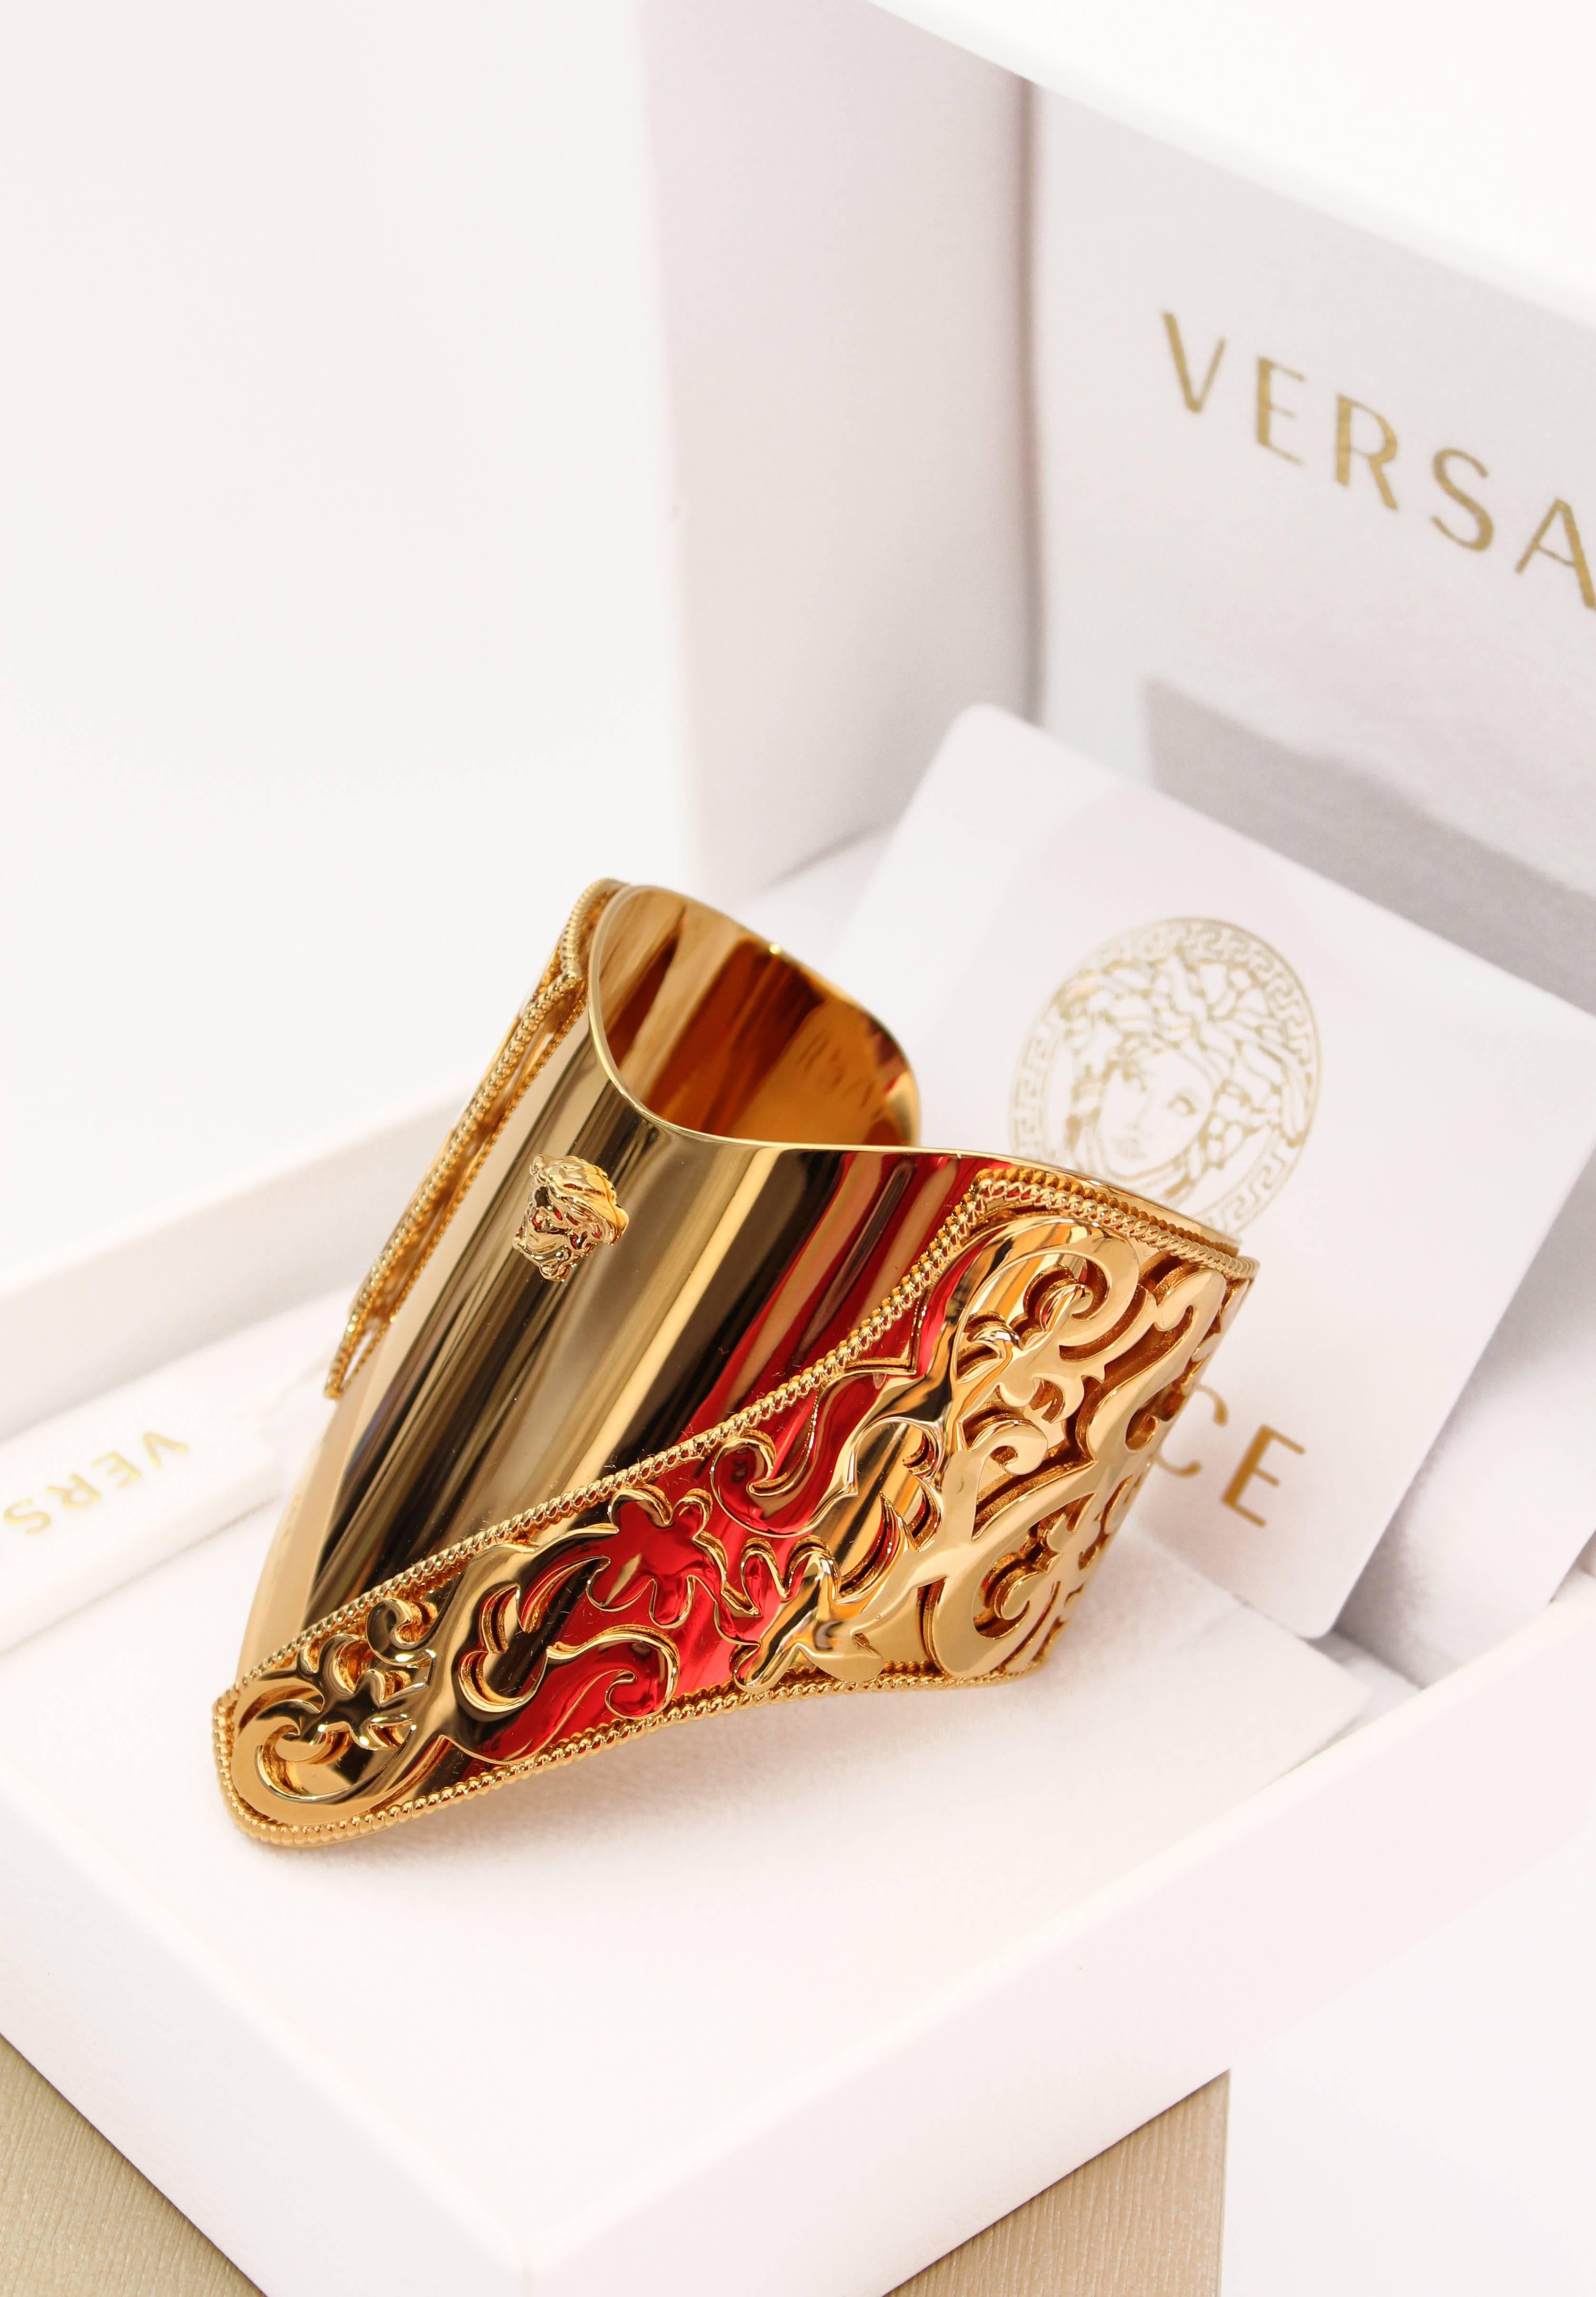 VERSACE

Take your accessorizing to a new level of luxury with this Versace cuff bracelet.
 
24K Gold Plated Metal

Made in Italy

Comes with Versace box.

Pre-owned, good condition! Has minor imperfections
100% authentic guarantee 


       PLEASE